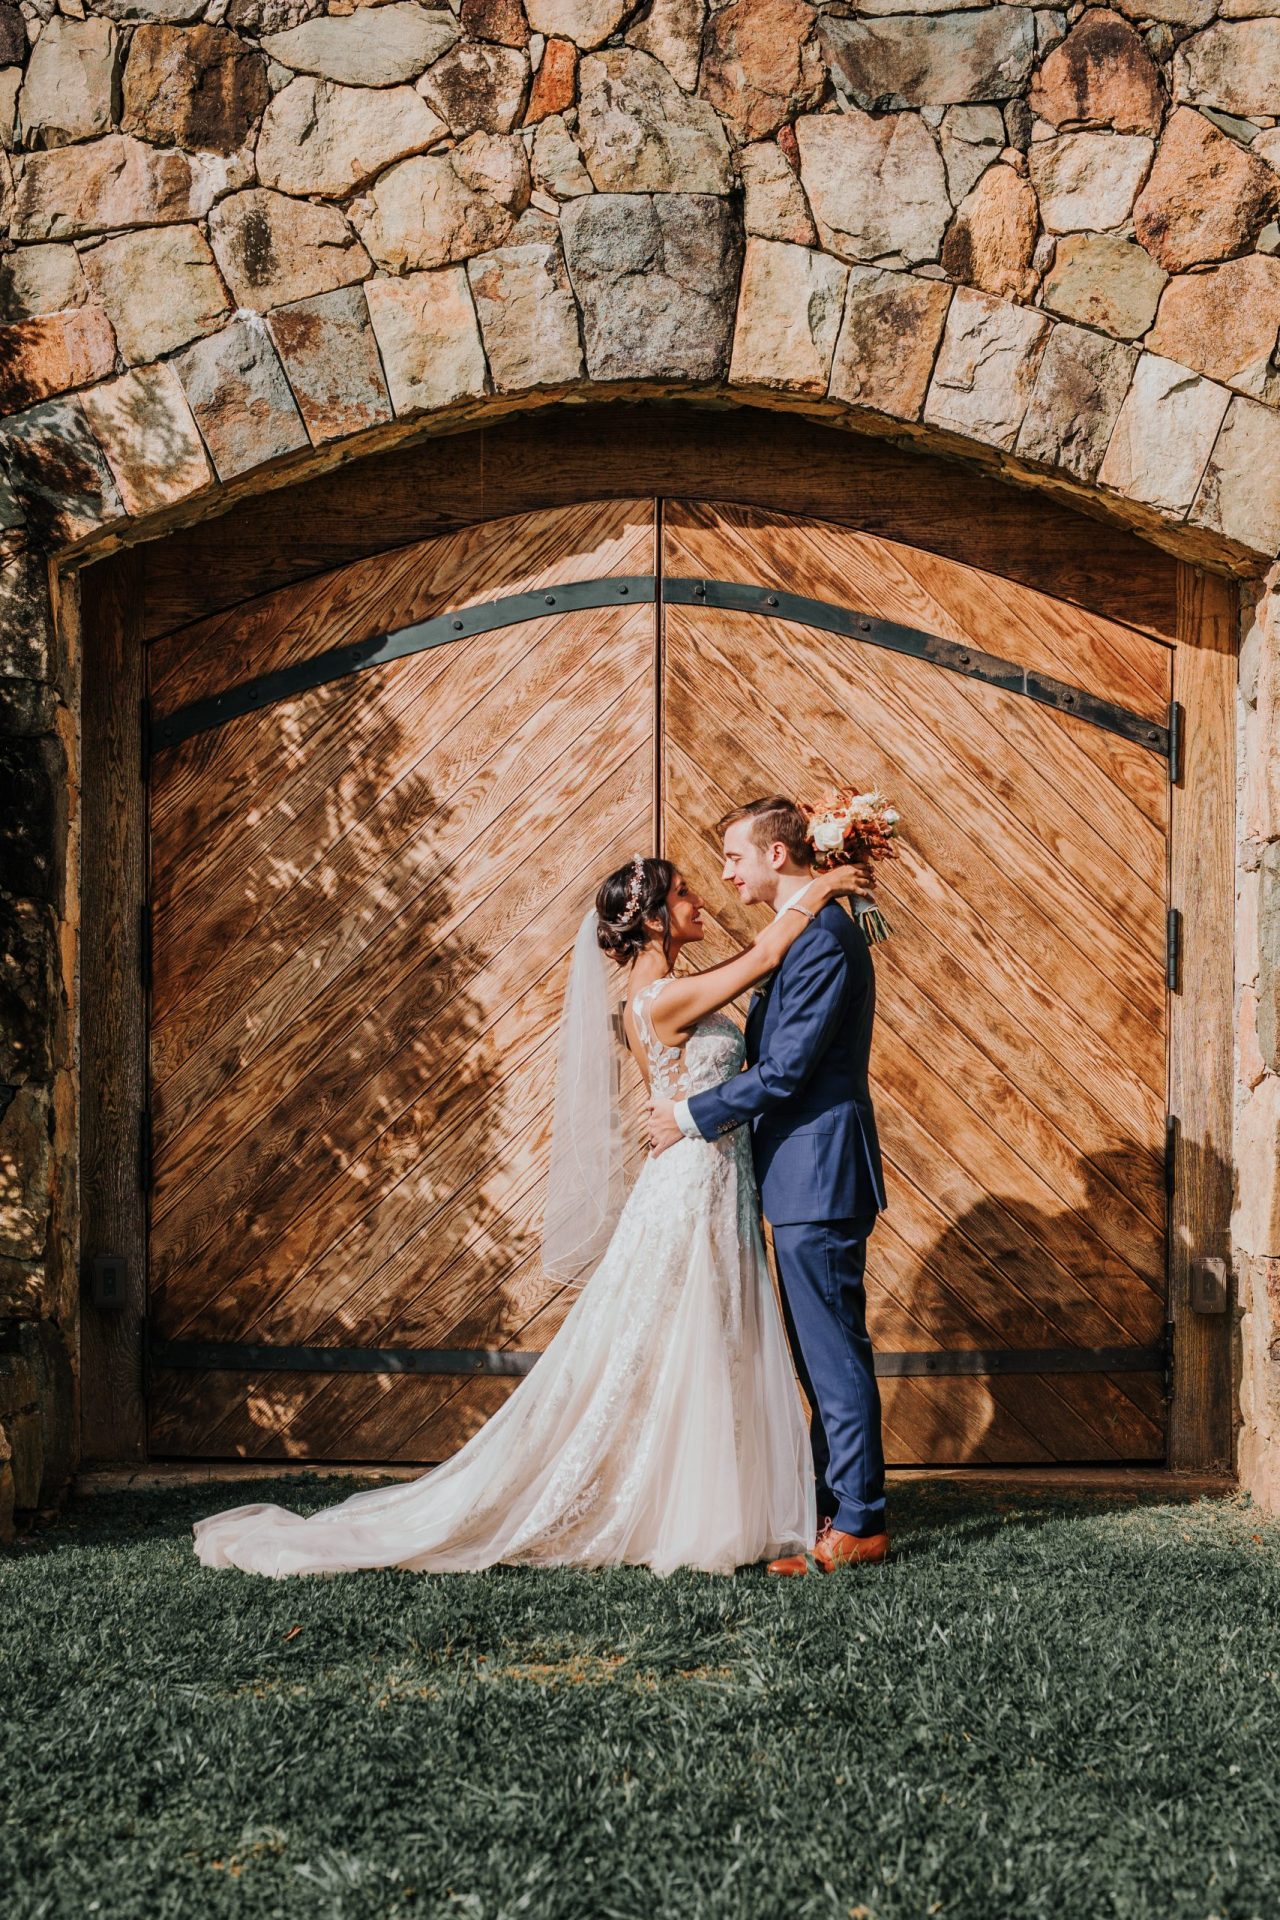  Brenda and Jeff's micro wedding at Stone Tower Winery, Leesburg, Virginia, captured beautifully in wedding photography.